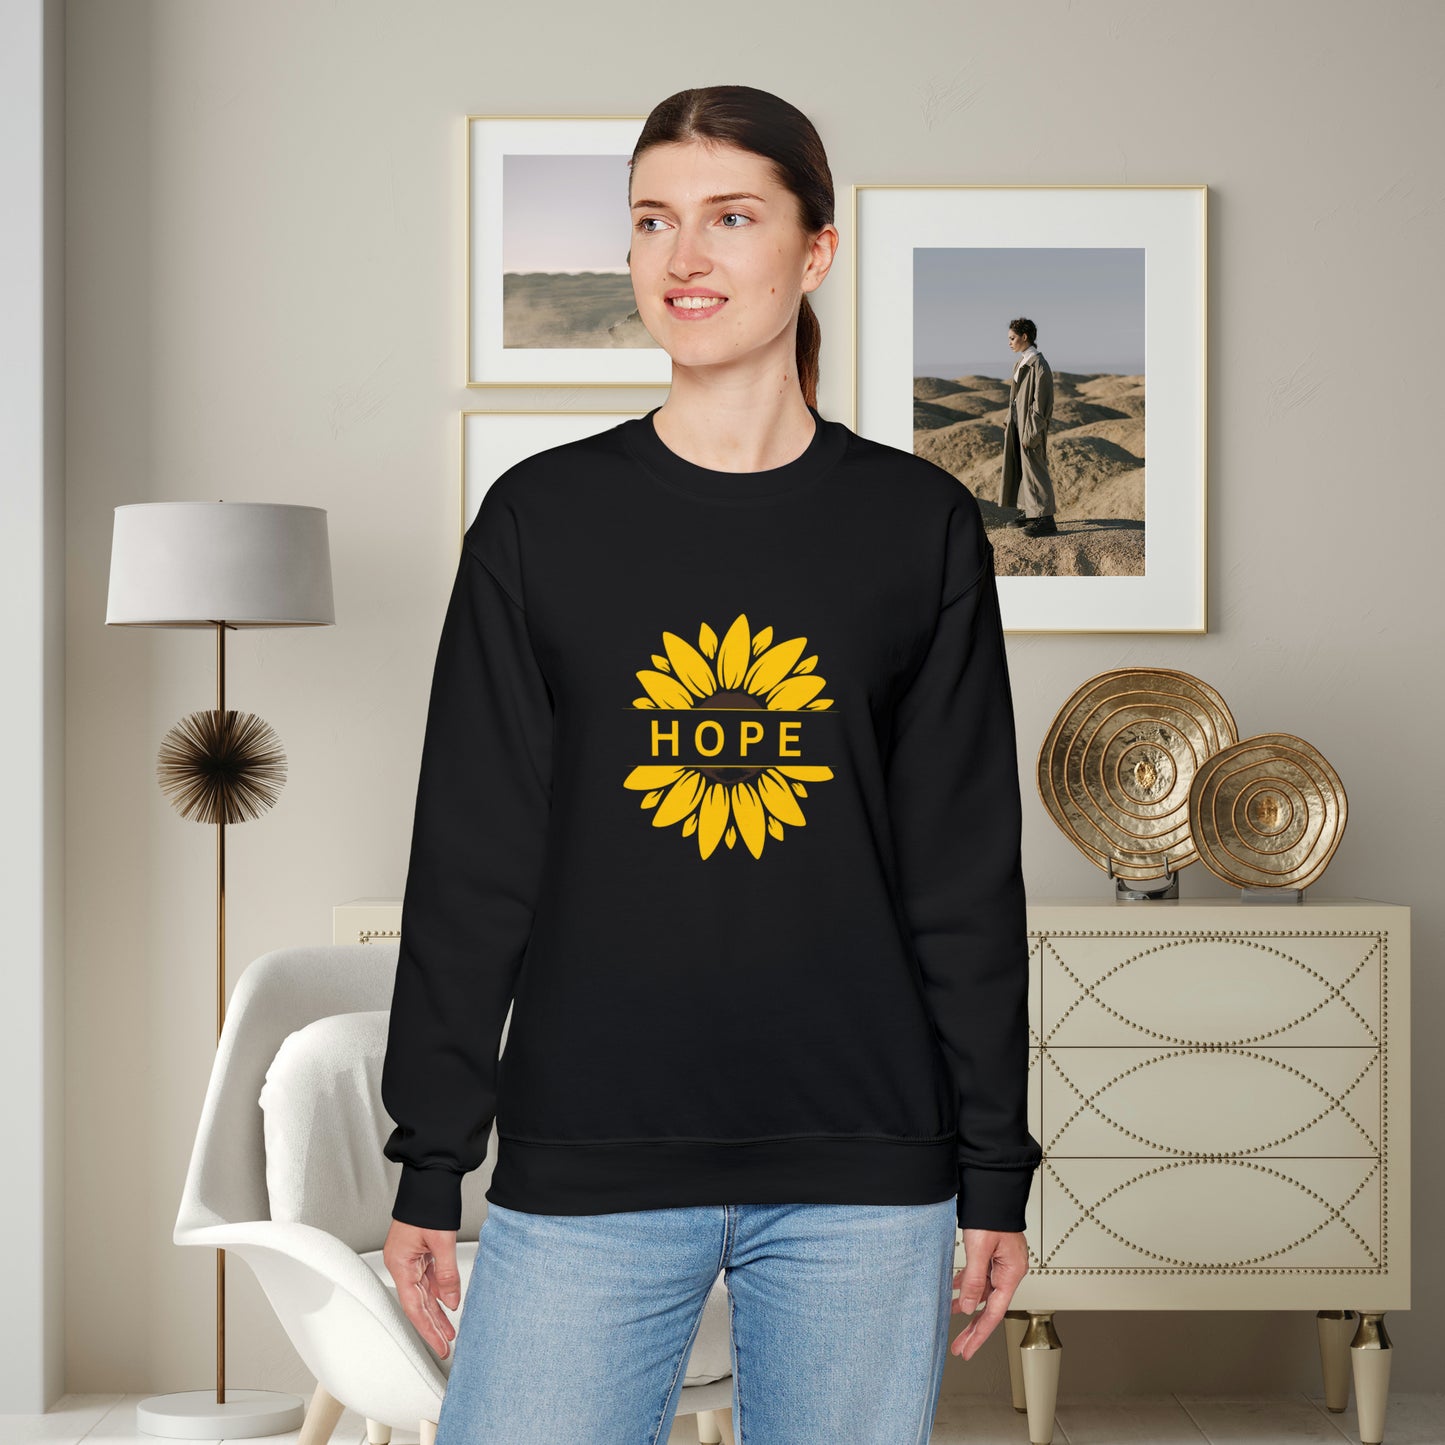 Beautiful sunflower with to inspire  “HOPE” comfy sweatshirt. Give the gift of this Unisex Heavy Blend™ Crewneck Sweatshirt or get one for yourself.